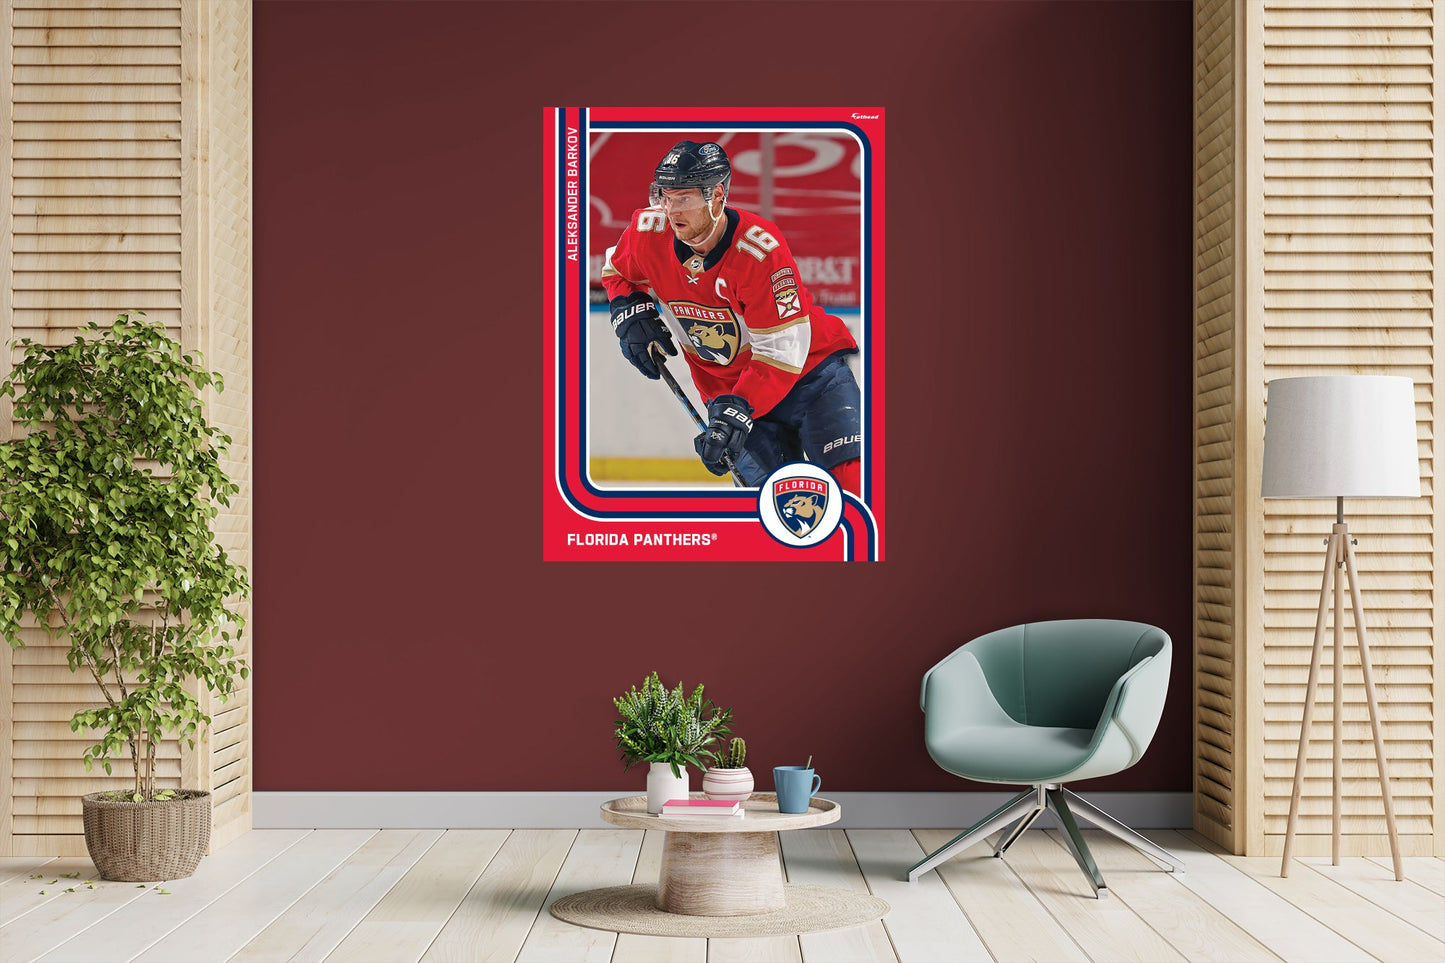 Florida Panthers: Aleksander Barkov Poster - Officially Licensed NHL Removable Adhesive Decal